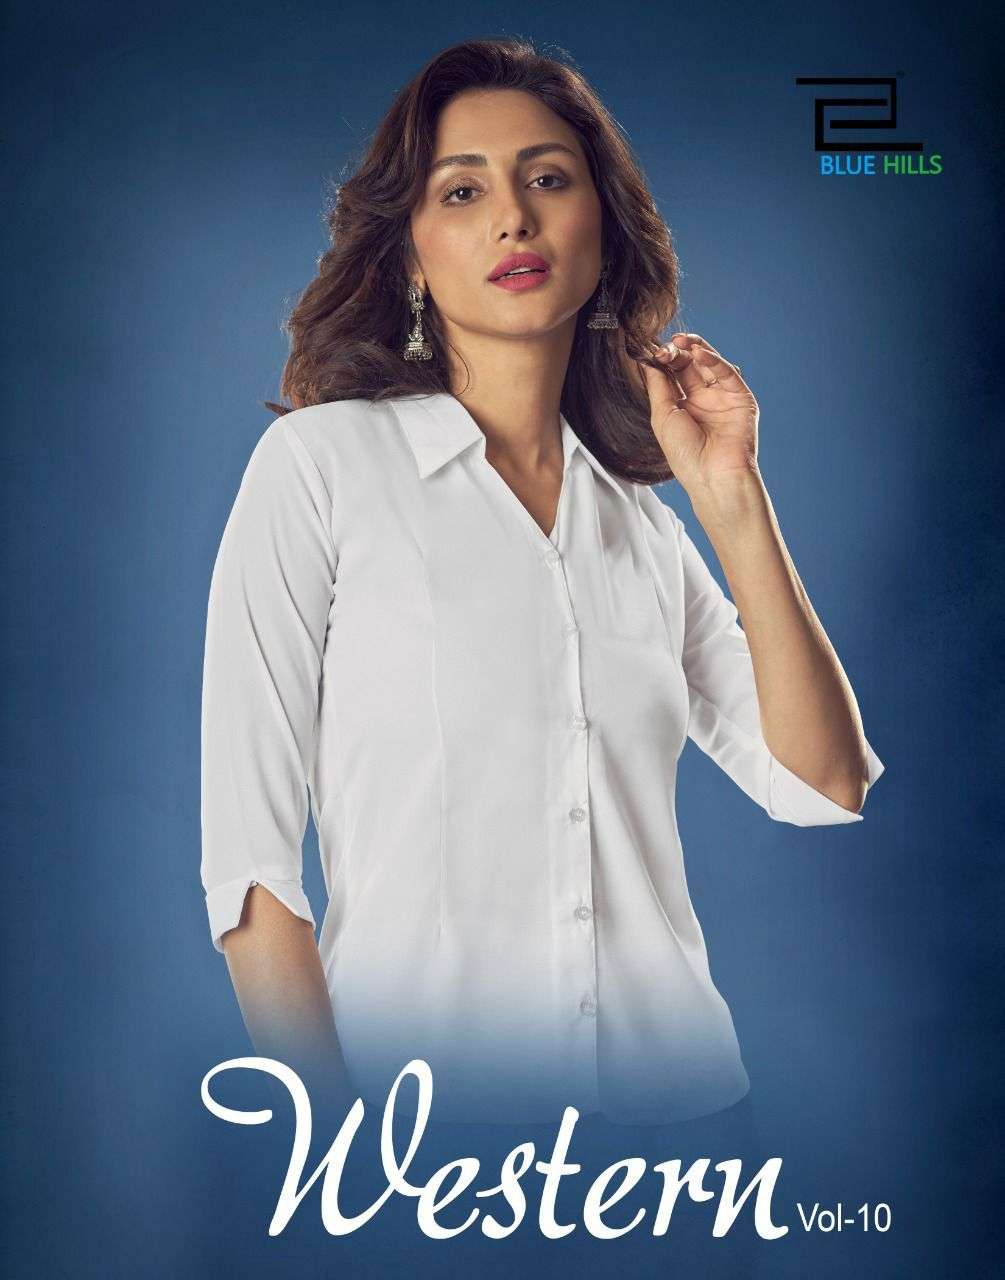 WESTERN VOL 10 BY BLUE HILLS BRAND 14 KG RAYON WESTERN WEAR CASUAL SHIRT WHOLESALER AND DEALER